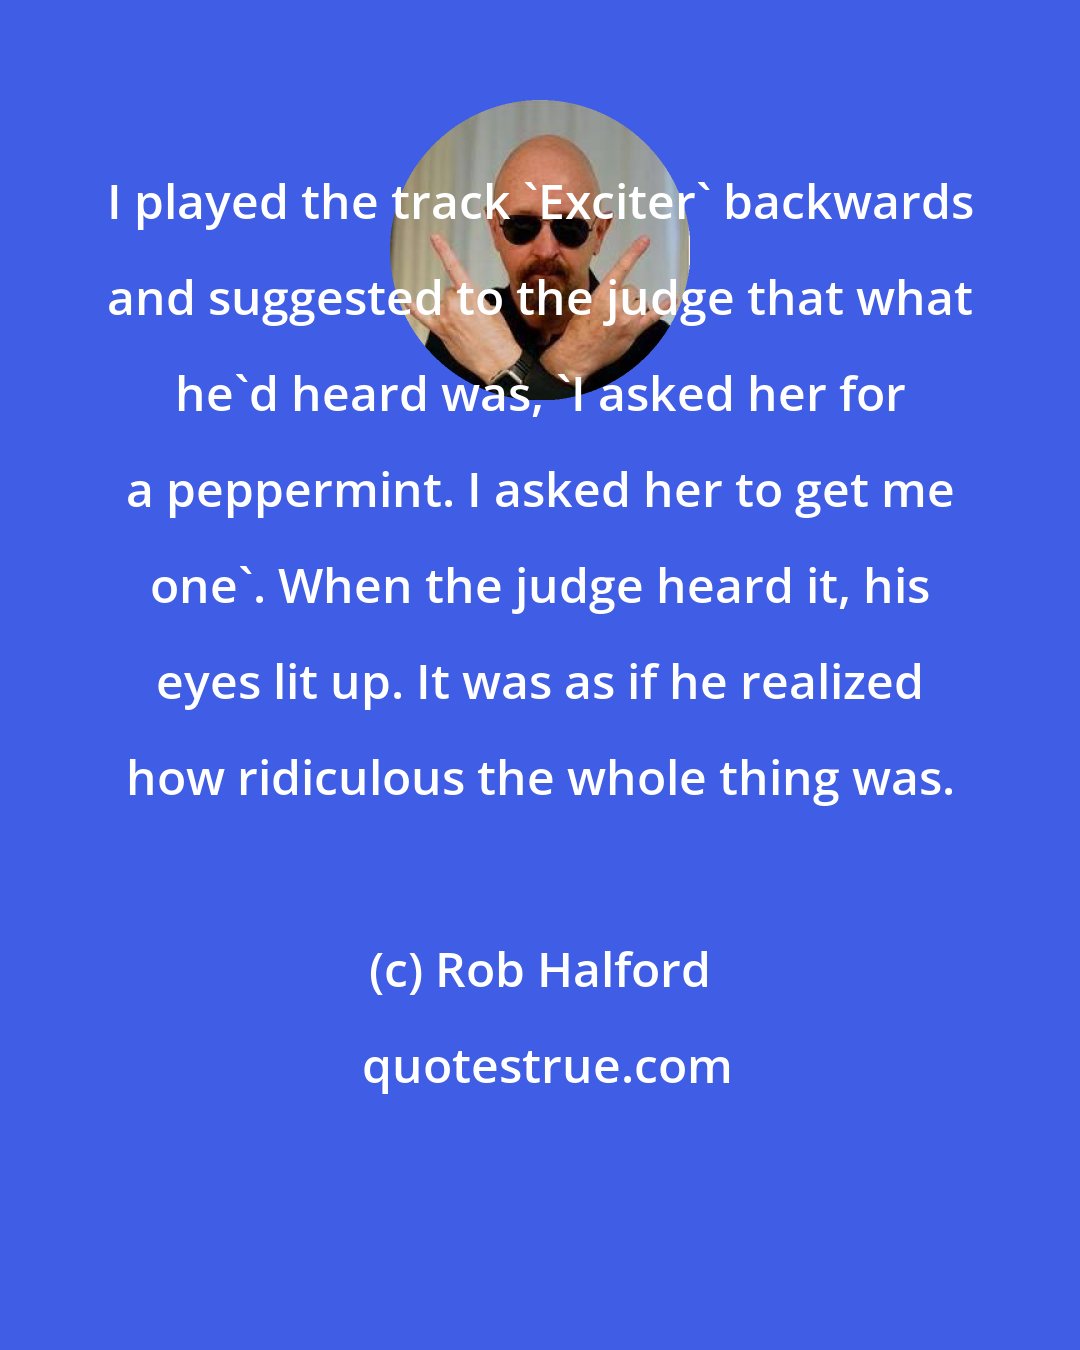 Rob Halford: I played the track 'Exciter' backwards and suggested to the judge that what he'd heard was, 'I asked her for a peppermint. I asked her to get me one'. When the judge heard it, his eyes lit up. It was as if he realized how ridiculous the whole thing was.